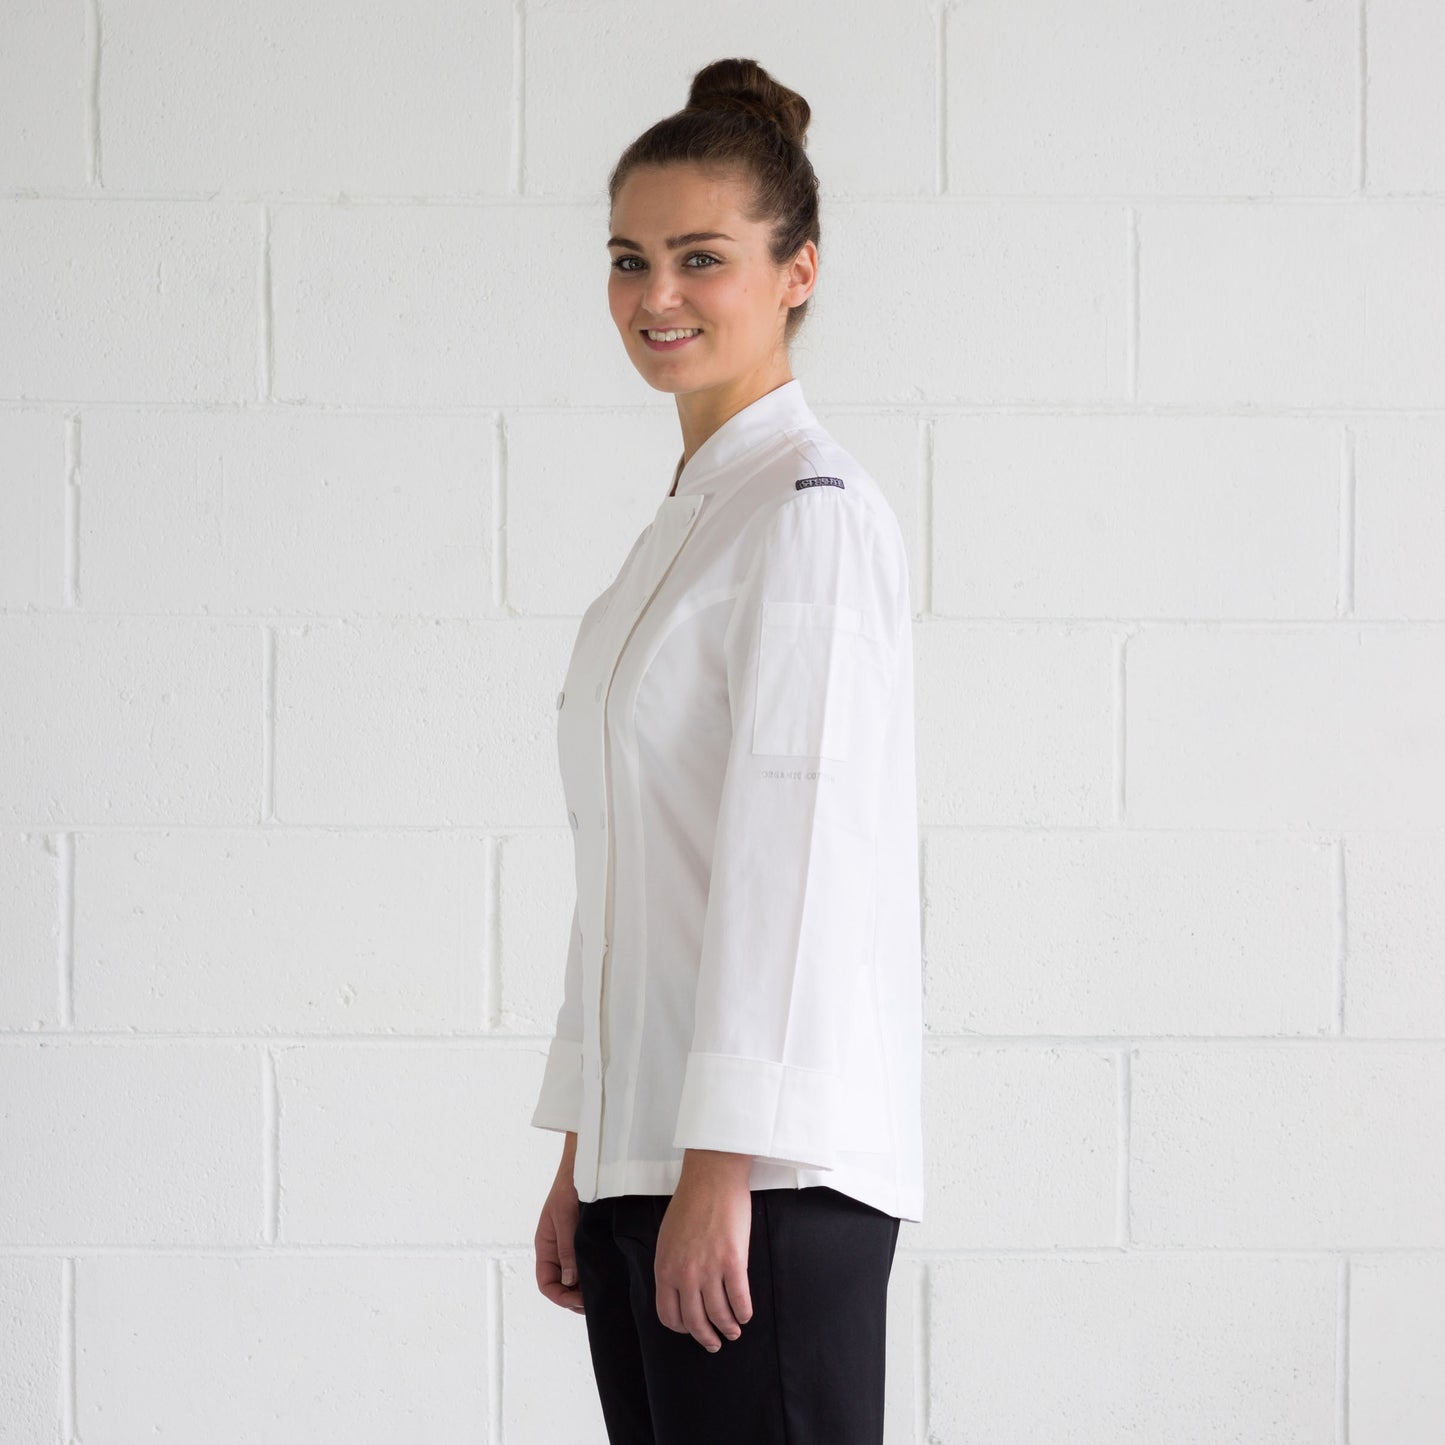 Women's BLISS white Chef Jacket with long sleeves. 100% organic cotton